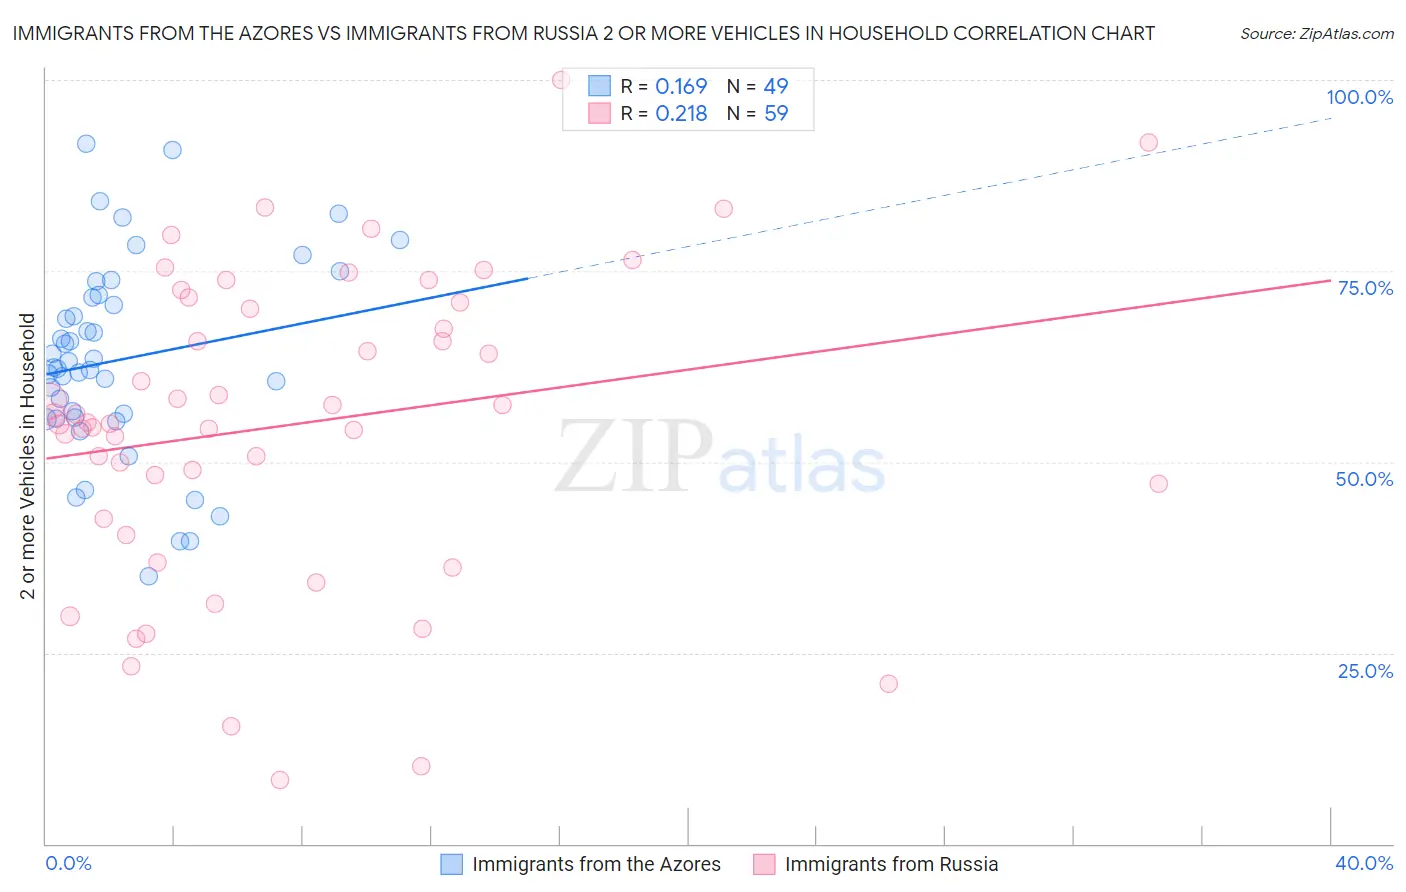 Immigrants from the Azores vs Immigrants from Russia 2 or more Vehicles in Household